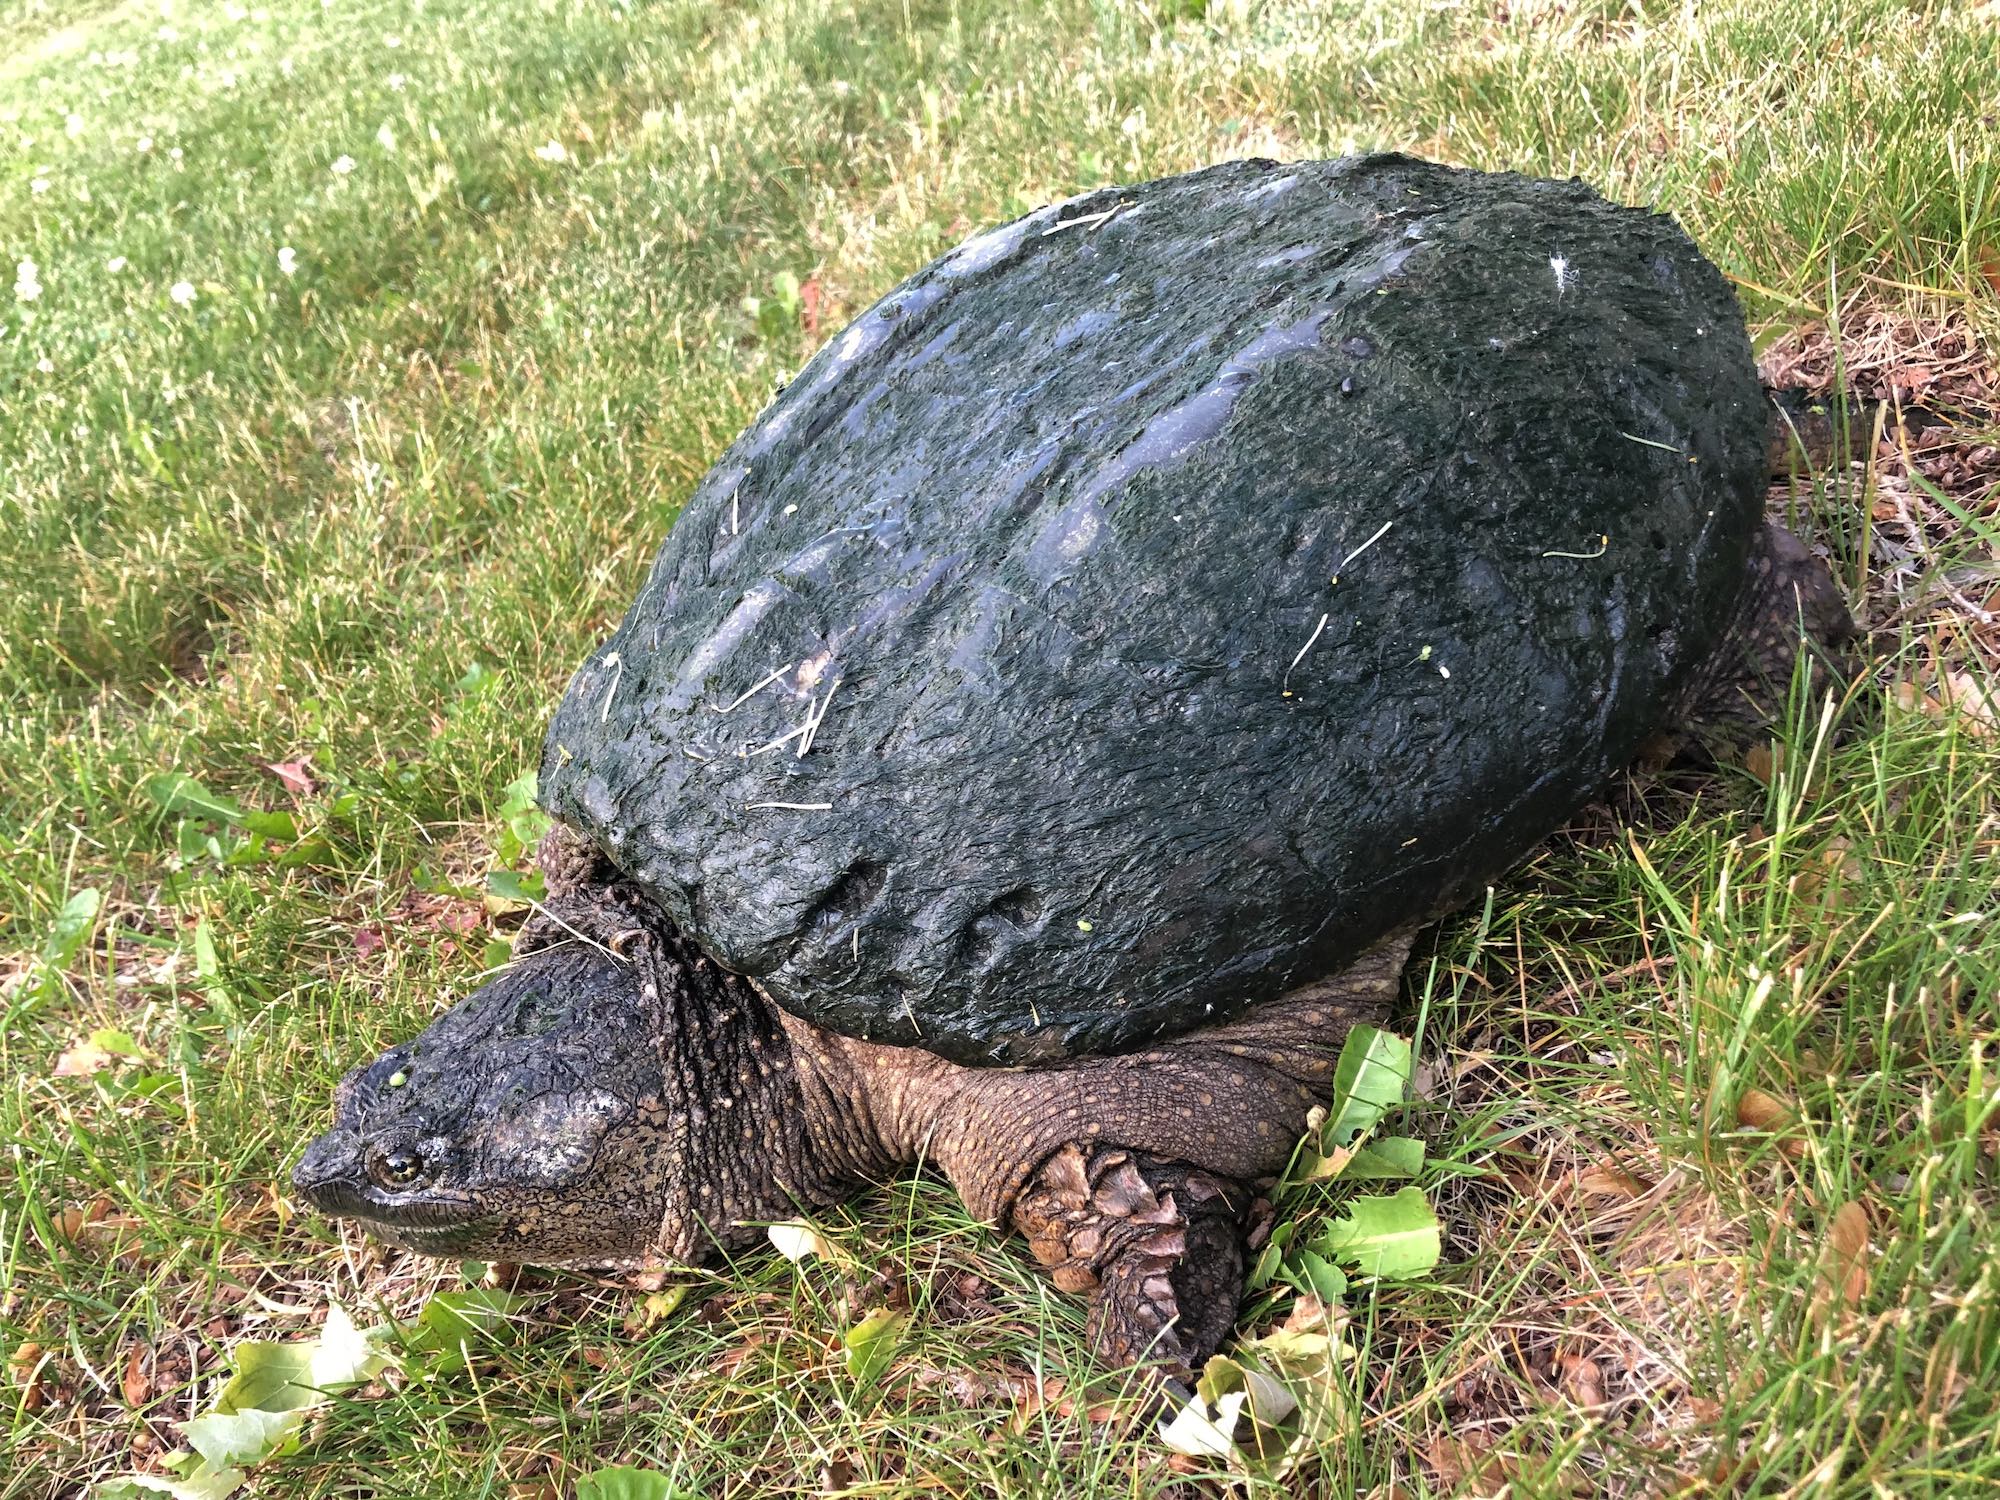 Snapping Turtle in E. Ray Stevens Pond and Aquatic Gardens on corner of Manitou Way and Nakoma Road in Madison, Wisconsin on June 8, 2021.